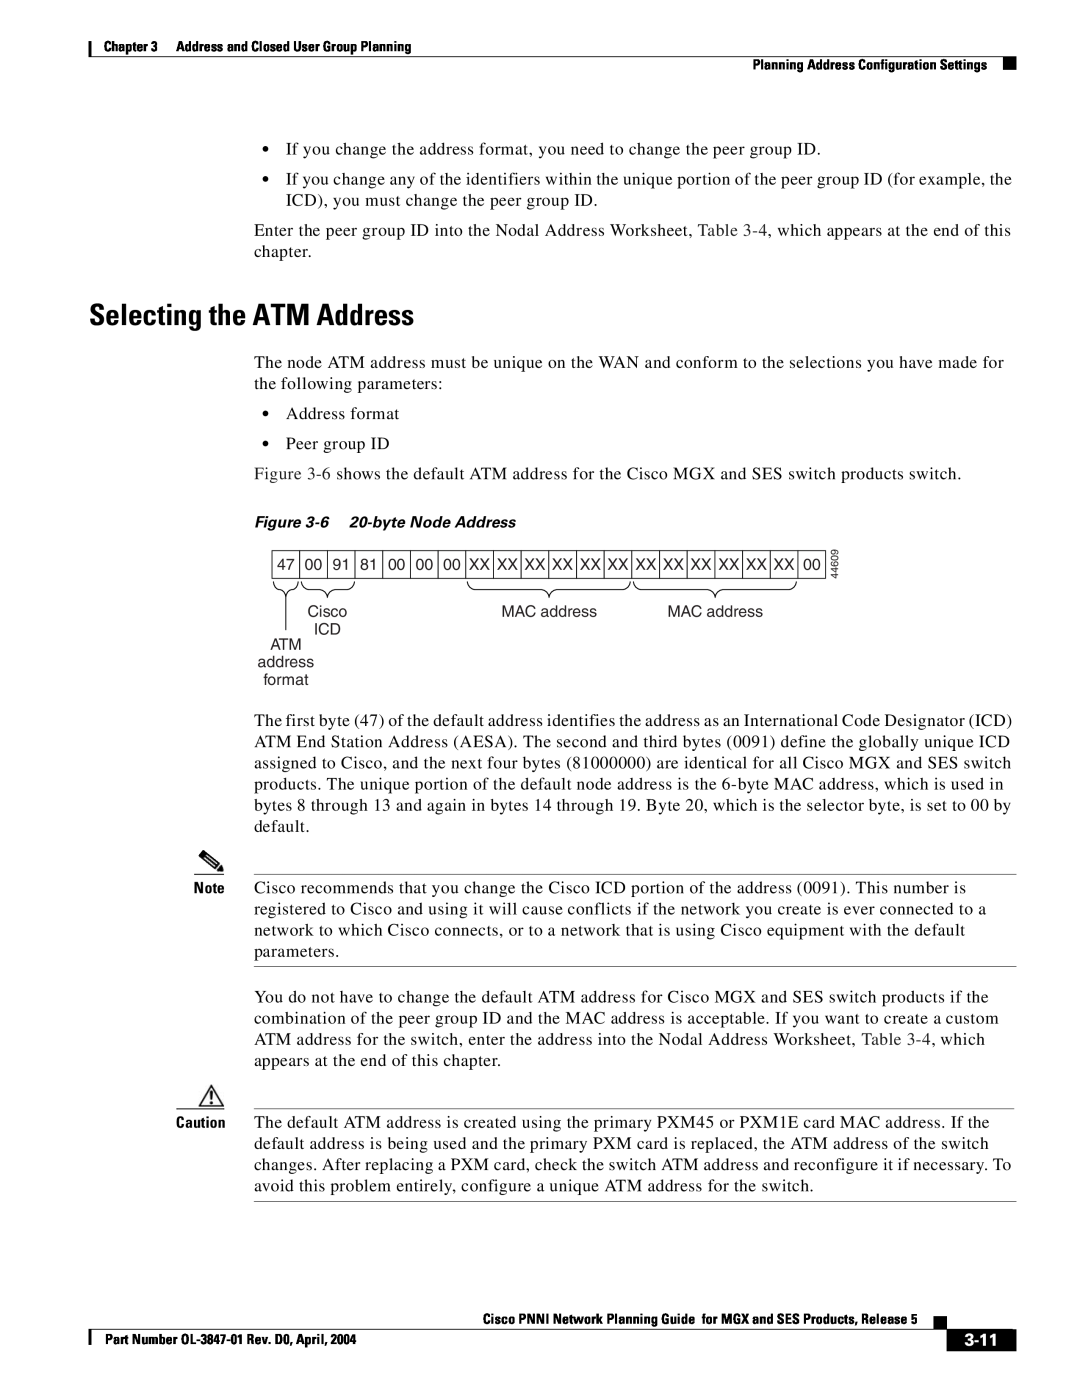 Cisco Systems Network Router manual Selecting the ATM Address, 3-11 